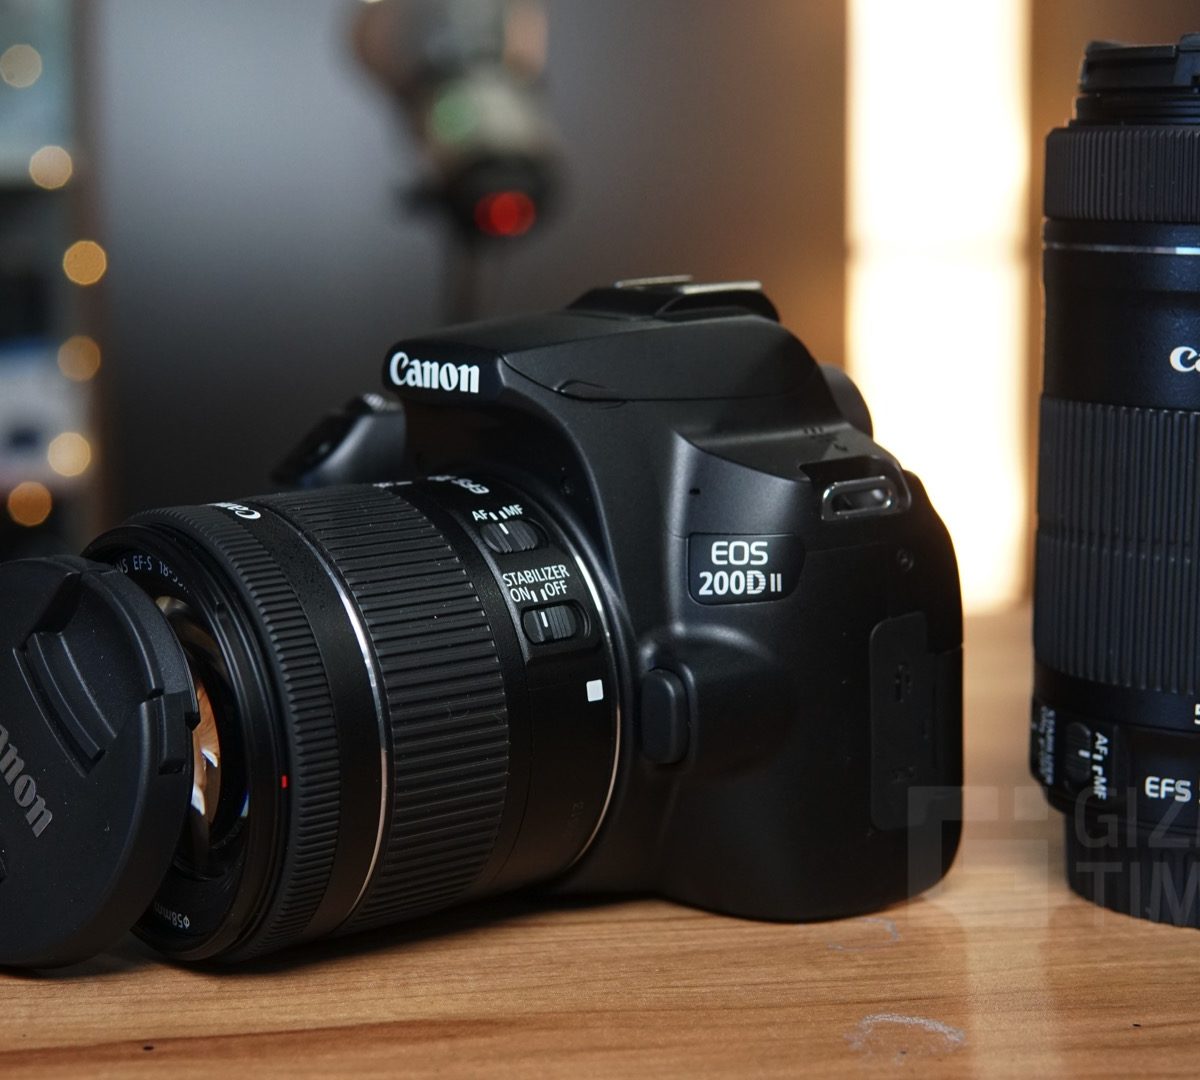 Canon EOS 200D II with EF-S 18-55mm F/4-5.6 IS STM Lens